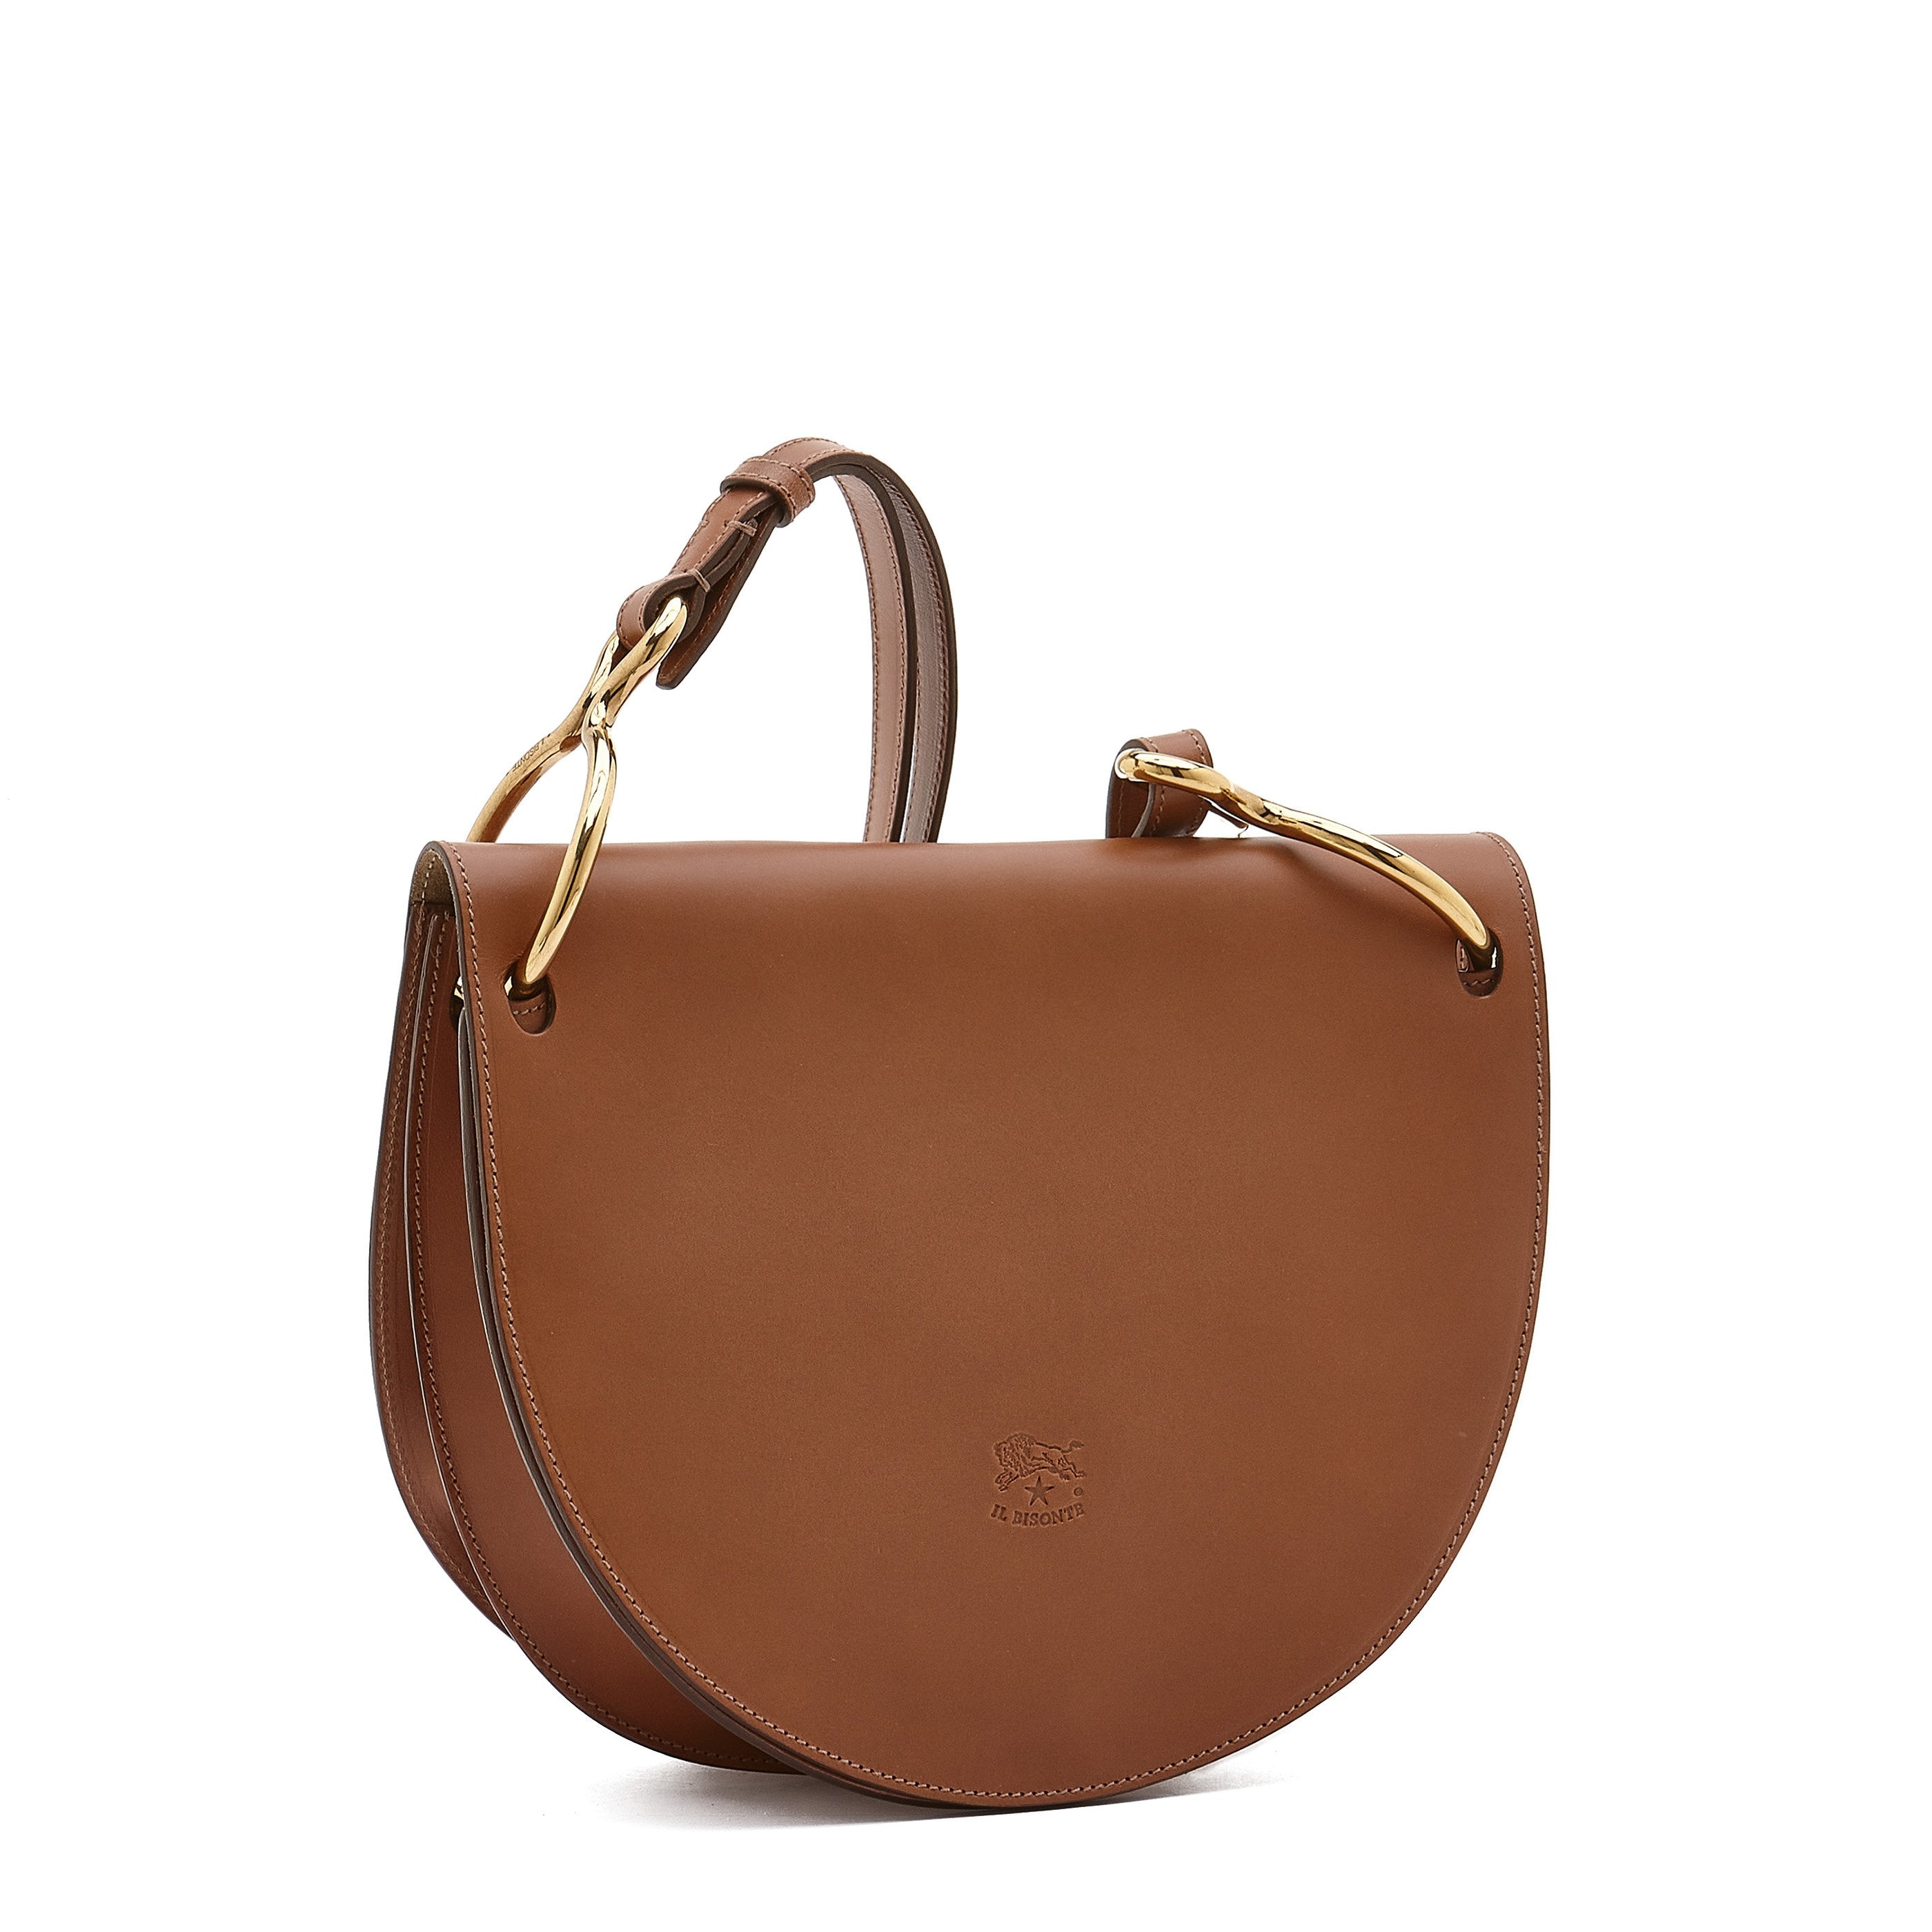 Consuelo | Women's Crossbody Bag in Leather color Chocolate